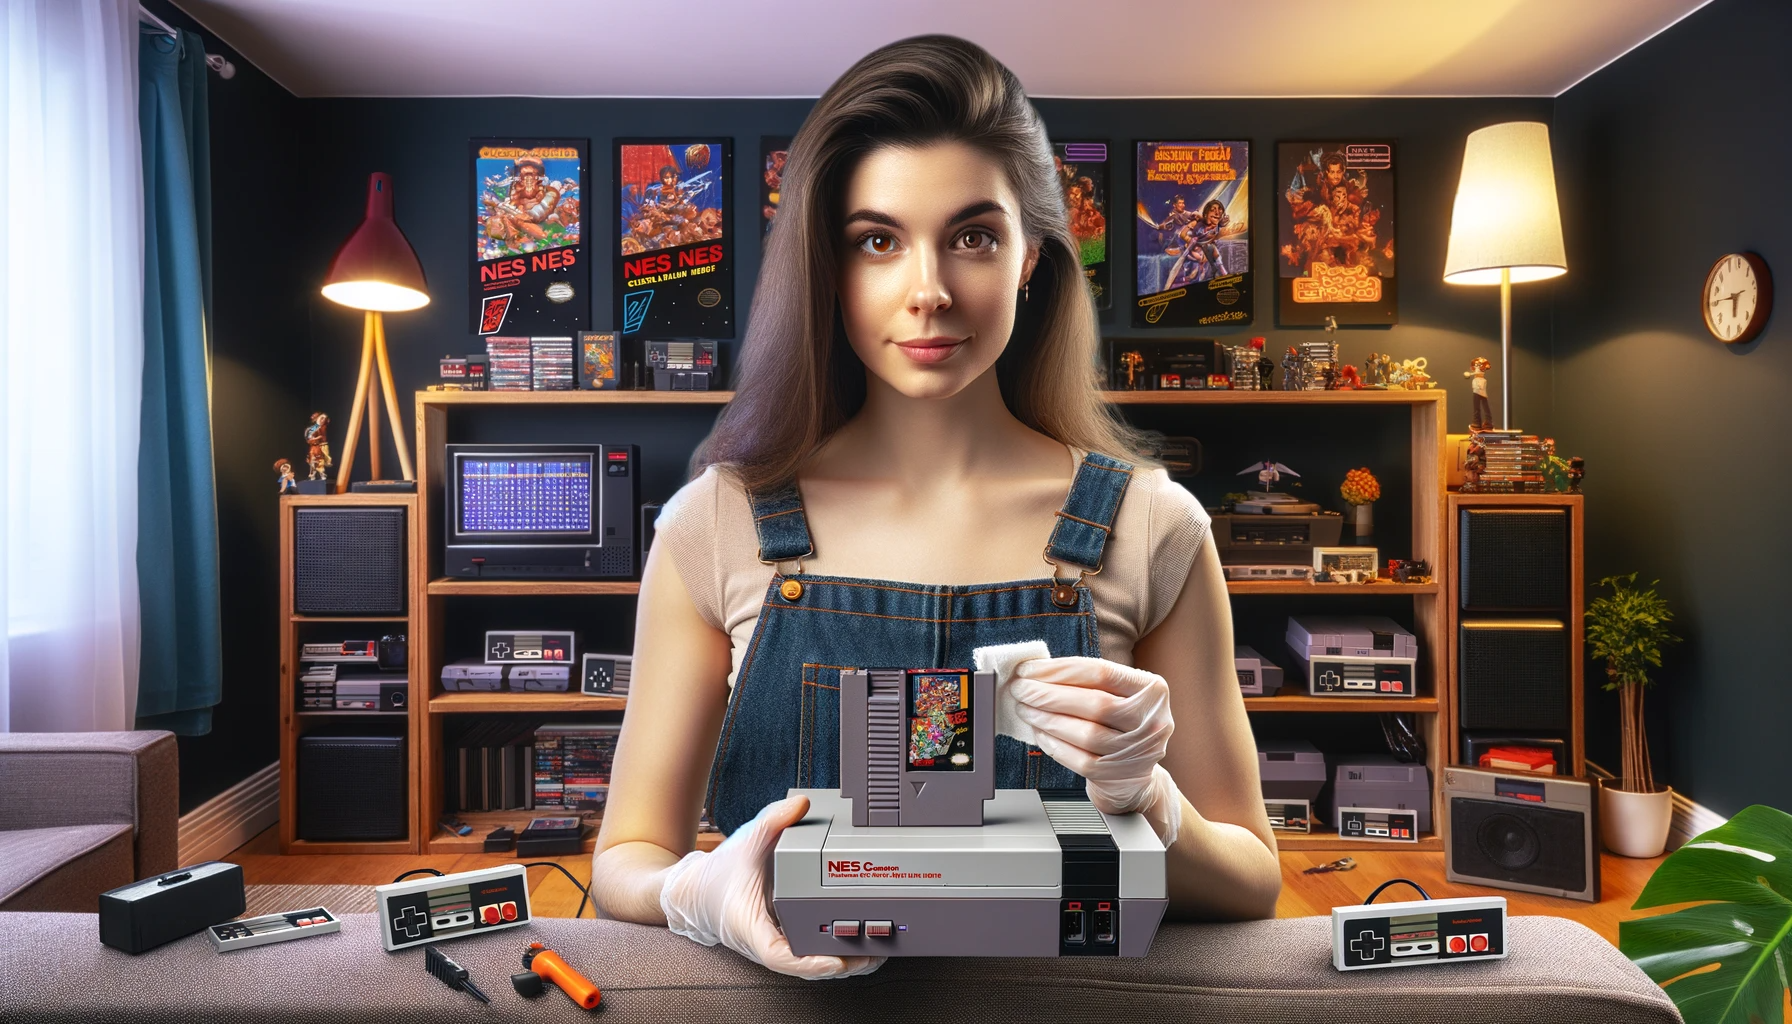 Girl cleaning a NES cartridge